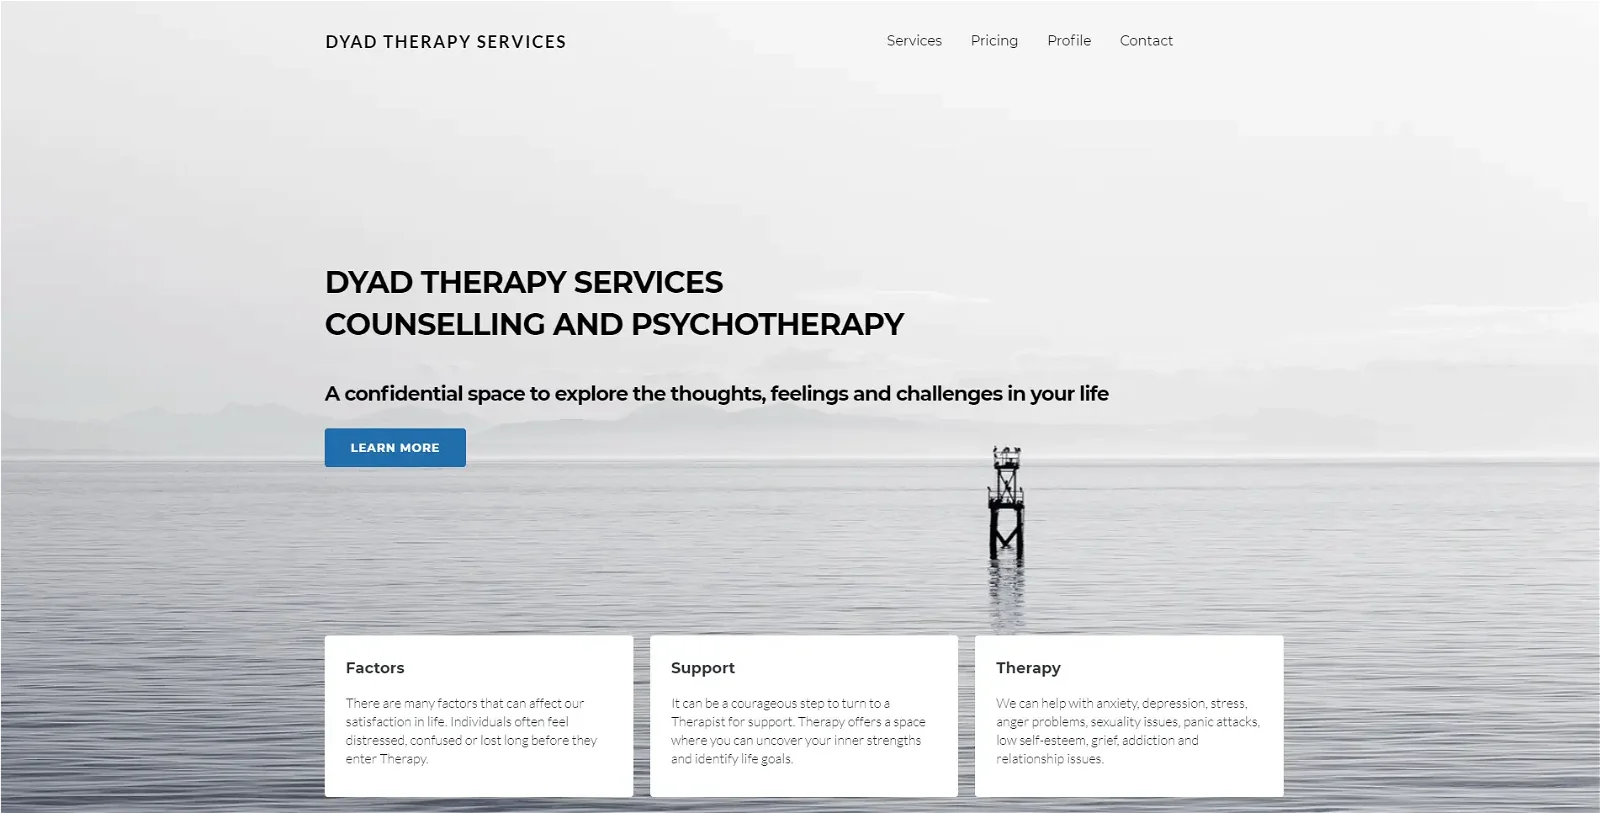 This image is advertising Dyad Therapy Services, which provides counselling and psychotherapy services to help people with various issues.